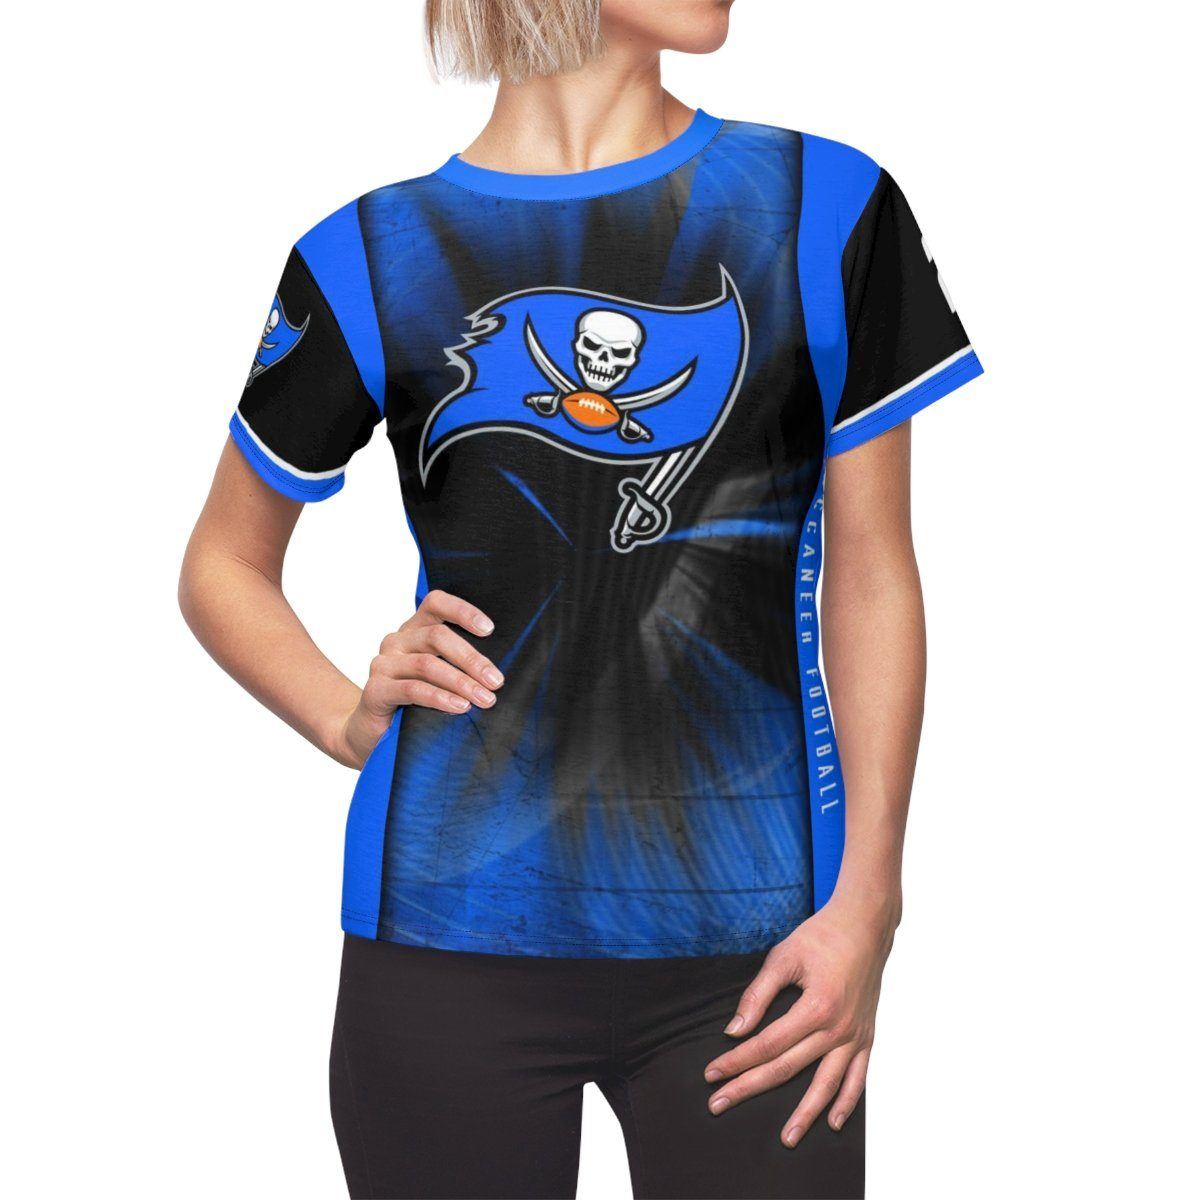 Buccaneer - V.1 - Extreme Sportswear Women's Cut & Sew Template-Photoshop Template - Photo Solutions